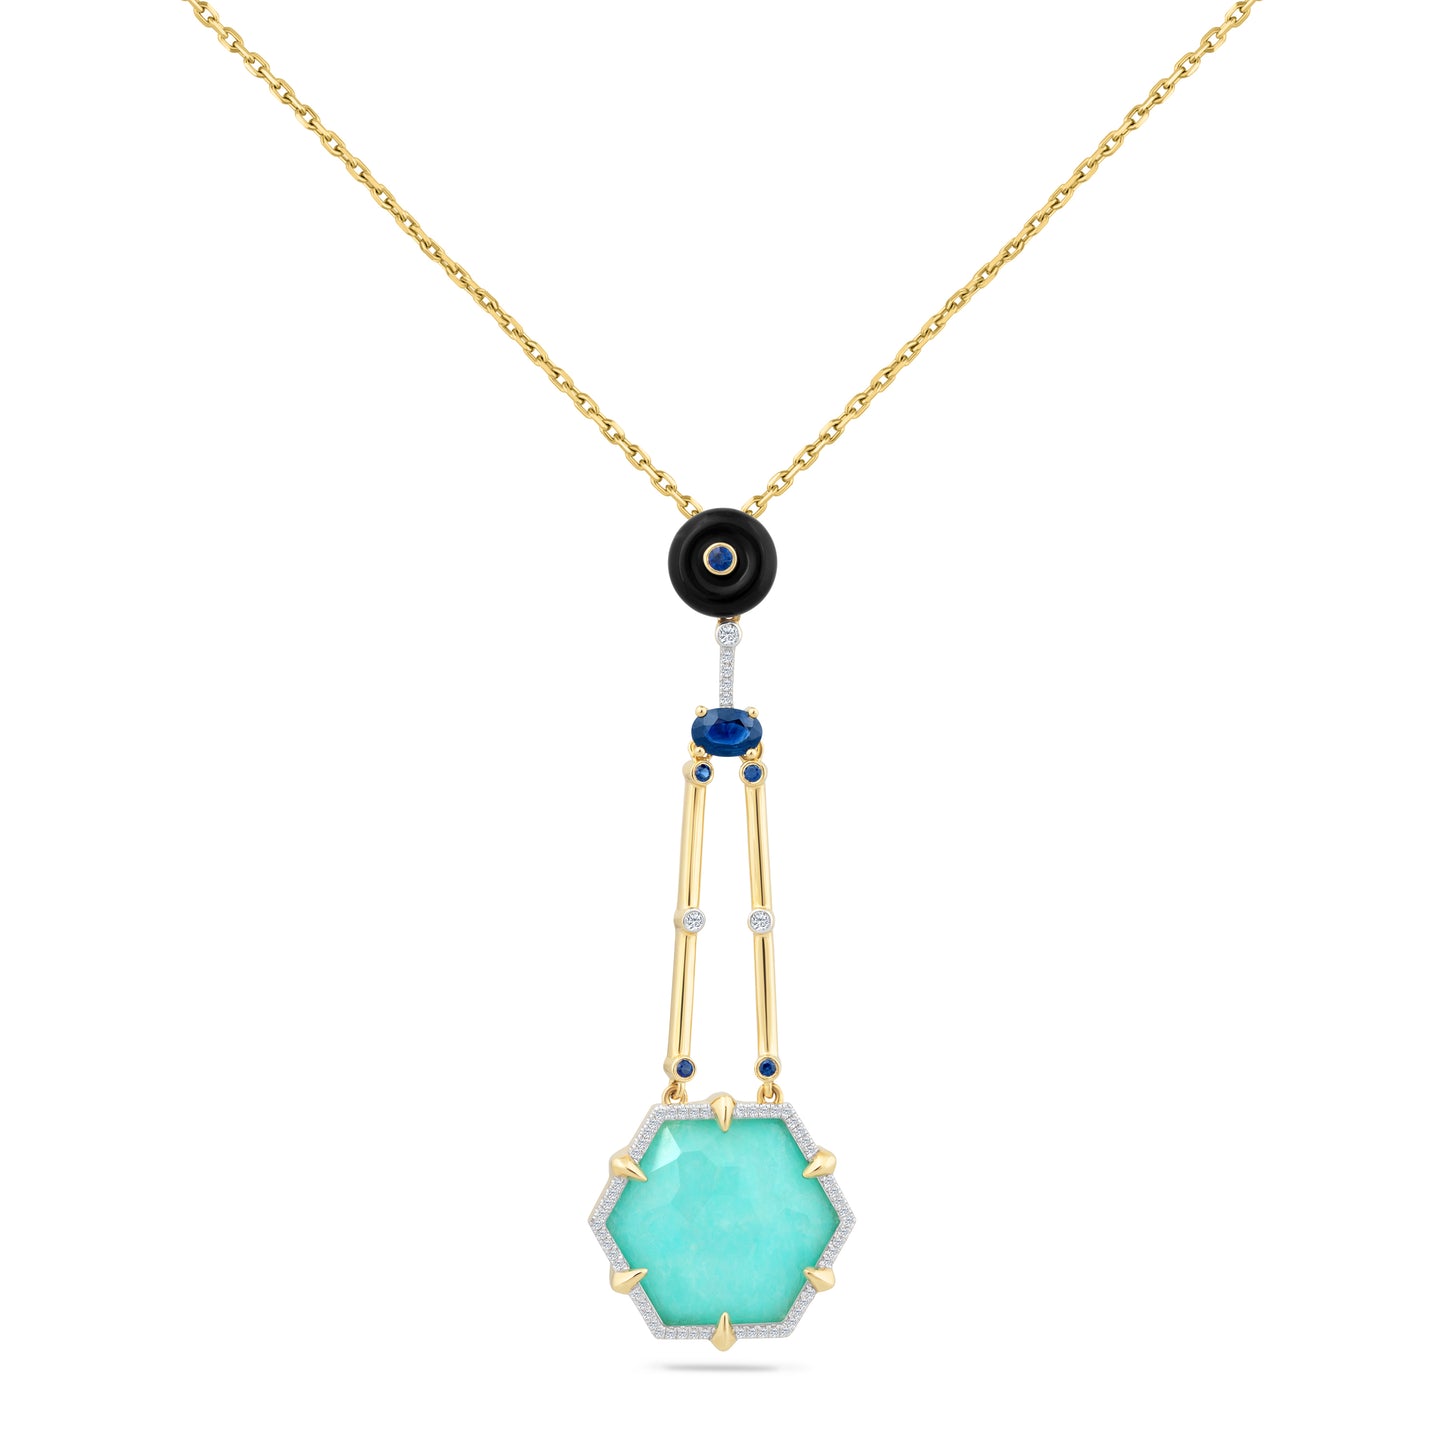 14K LONG HEXAGON SHAPED DOUBLET IN AMAZONITE AND CLEAR QUARTZ PENDANT. WITH DIAMONDS, SAPPHIRES AND BLACK ONYX ON 18 INCHES CABLE CHAIN